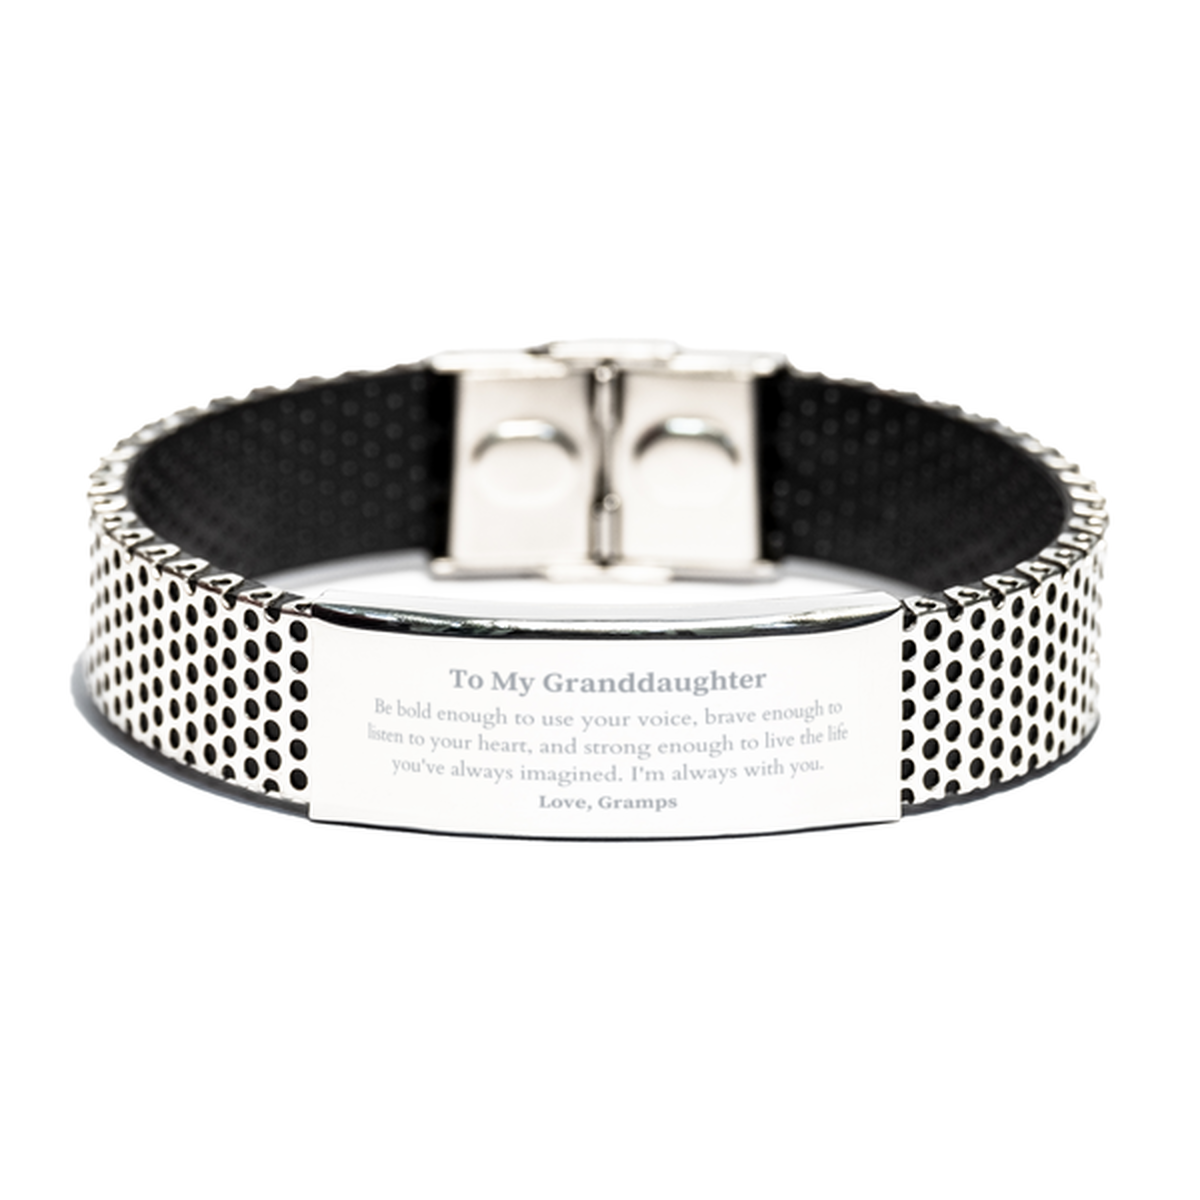 Keepsake Granddaughter Stainless Steel Bracelet Gift Idea Graduation Christmas Birthday Granddaughter from Gramps, Granddaughter Be bold enough to use your voice, brave enough to listen to your heart. Love, Gramps